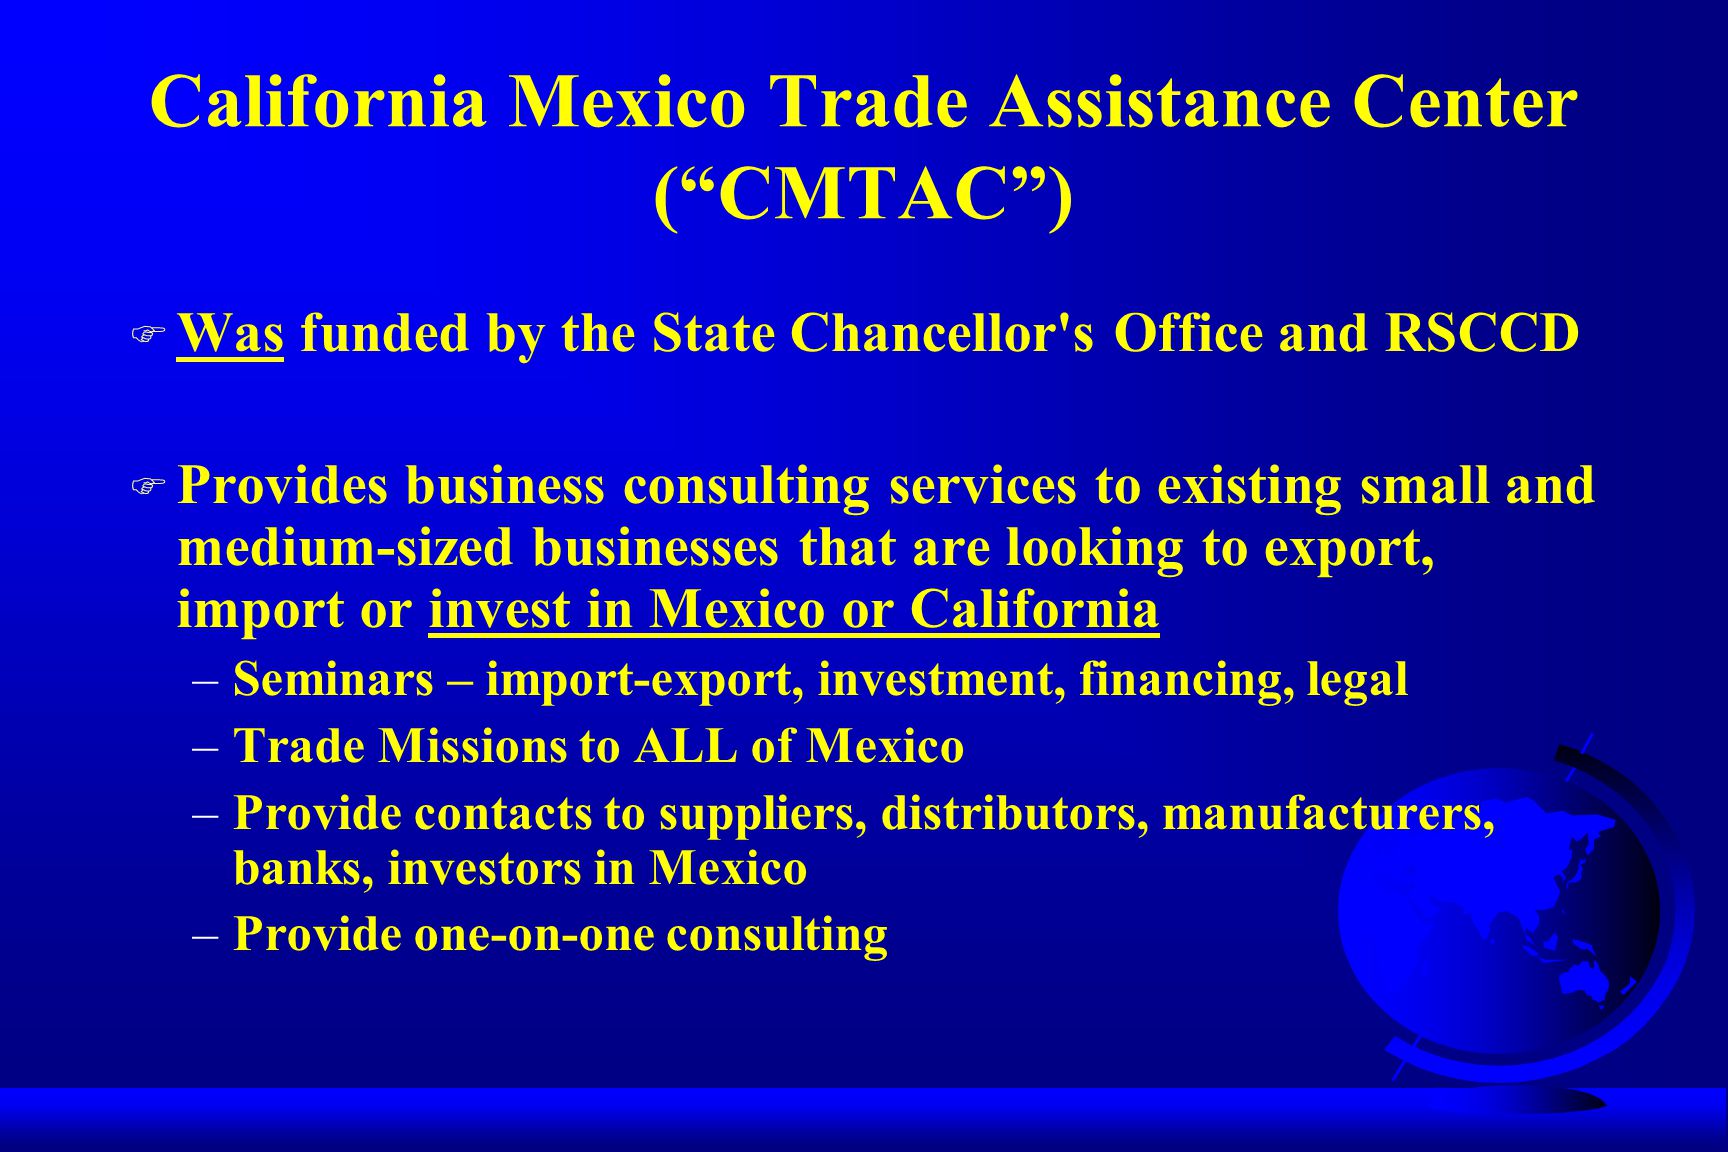 California Mexico Trade Assistance Center ( CMTAC ) F Was funded by the State Chancellor s Office and RSCCD F Provides business consulting services to existing small and medium-sized businesses that are looking to export, import or invest in Mexico or California –Seminars – import-export, investment, financing, legal –Trade Missions to ALL of Mexico –Provide contacts to suppliers, distributors, manufacturers, banks, investors in Mexico –Provide one-on-one consulting